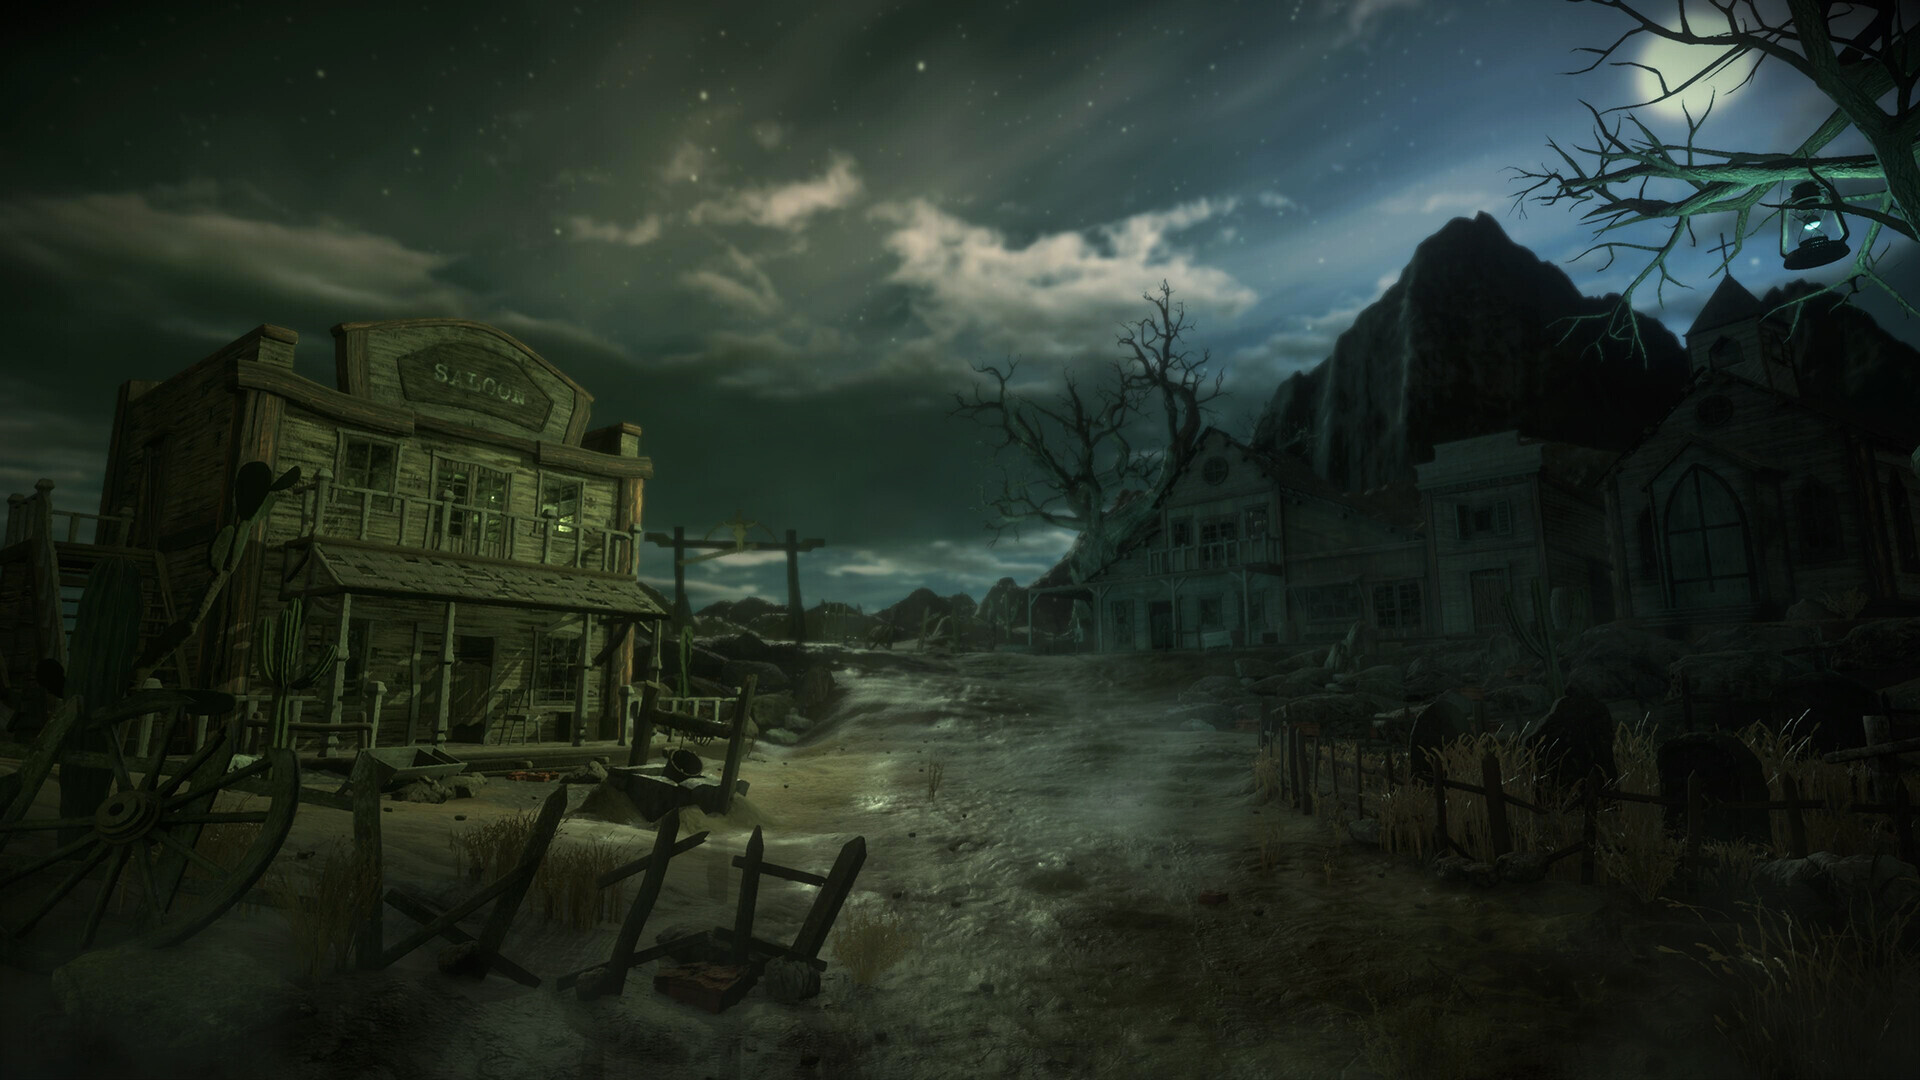 Ghost Town: The settlement that was abandoned as a result of a natural or human-made disaster. 1920x1080 Full HD Wallpaper.